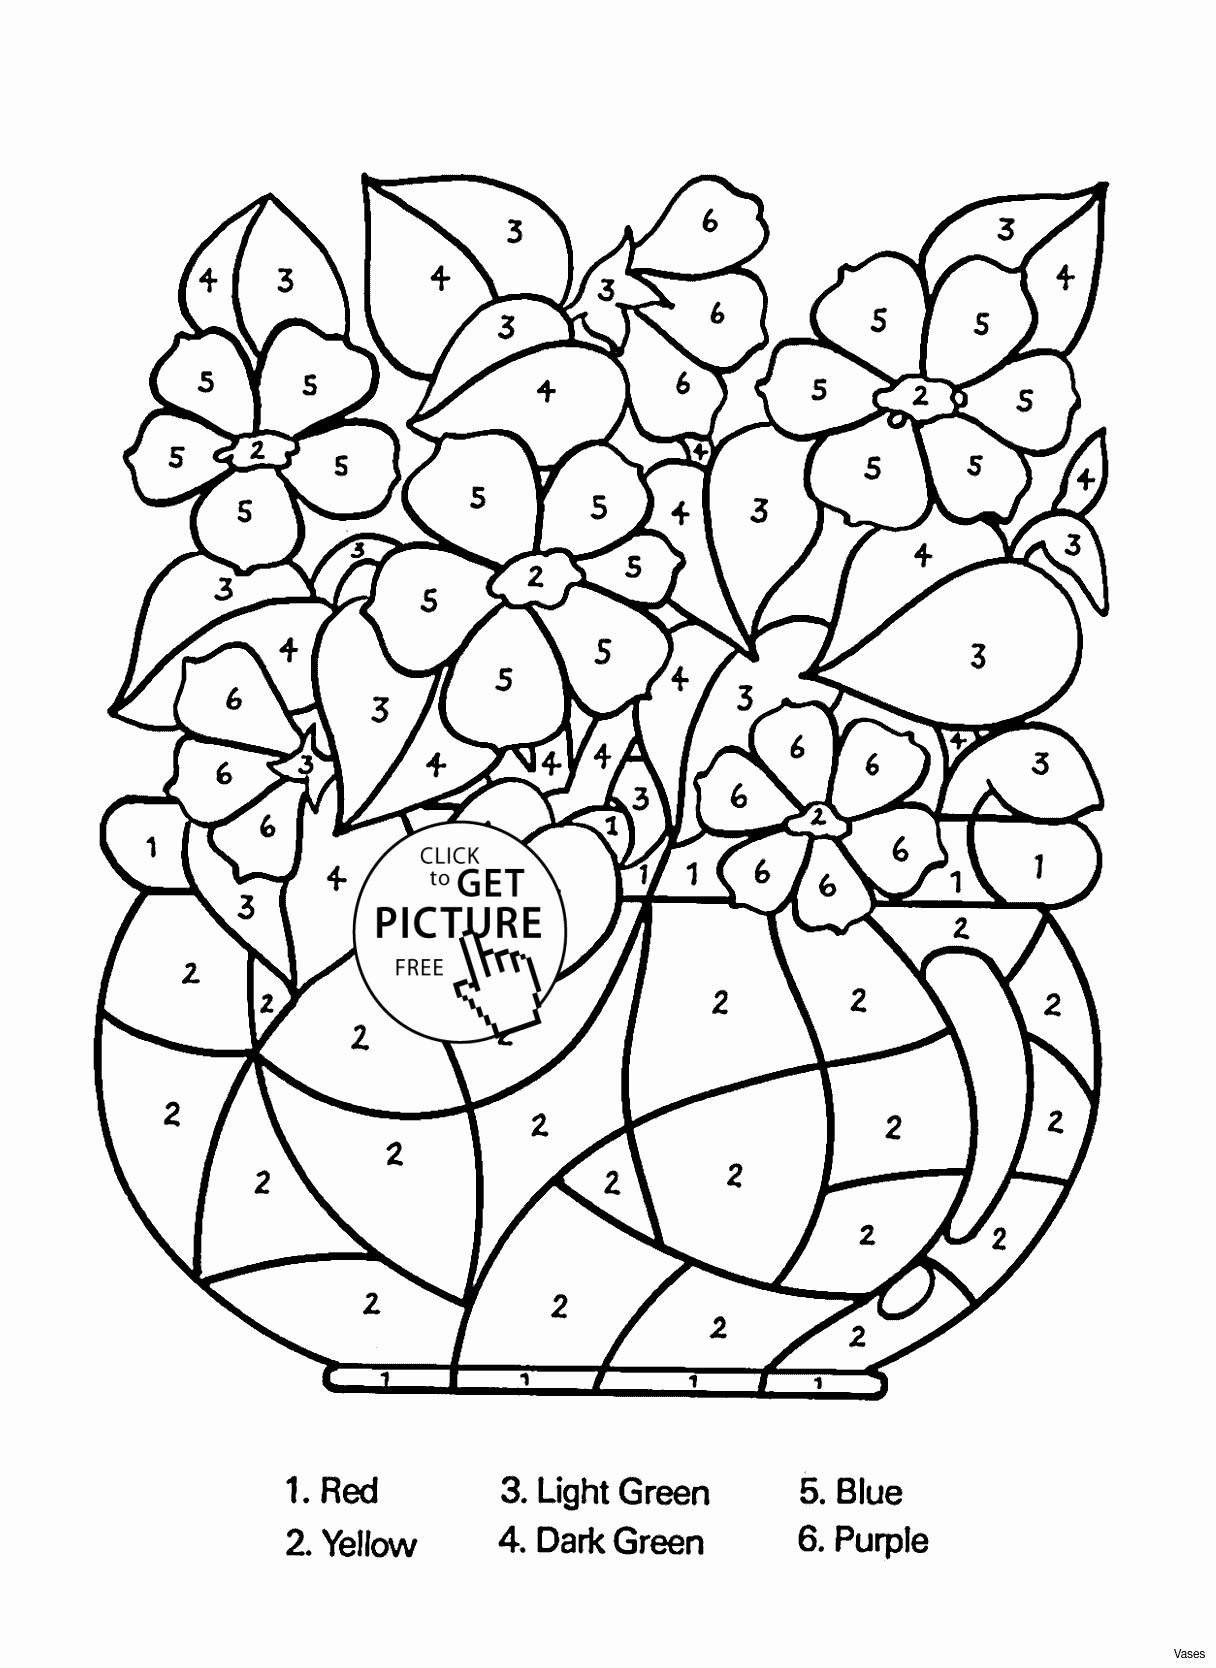 red fenton vase of black glass vases photos vases flower vase coloring page pages for black glass vases photos vases flower vase coloring page pages flowers in a top i 0d and